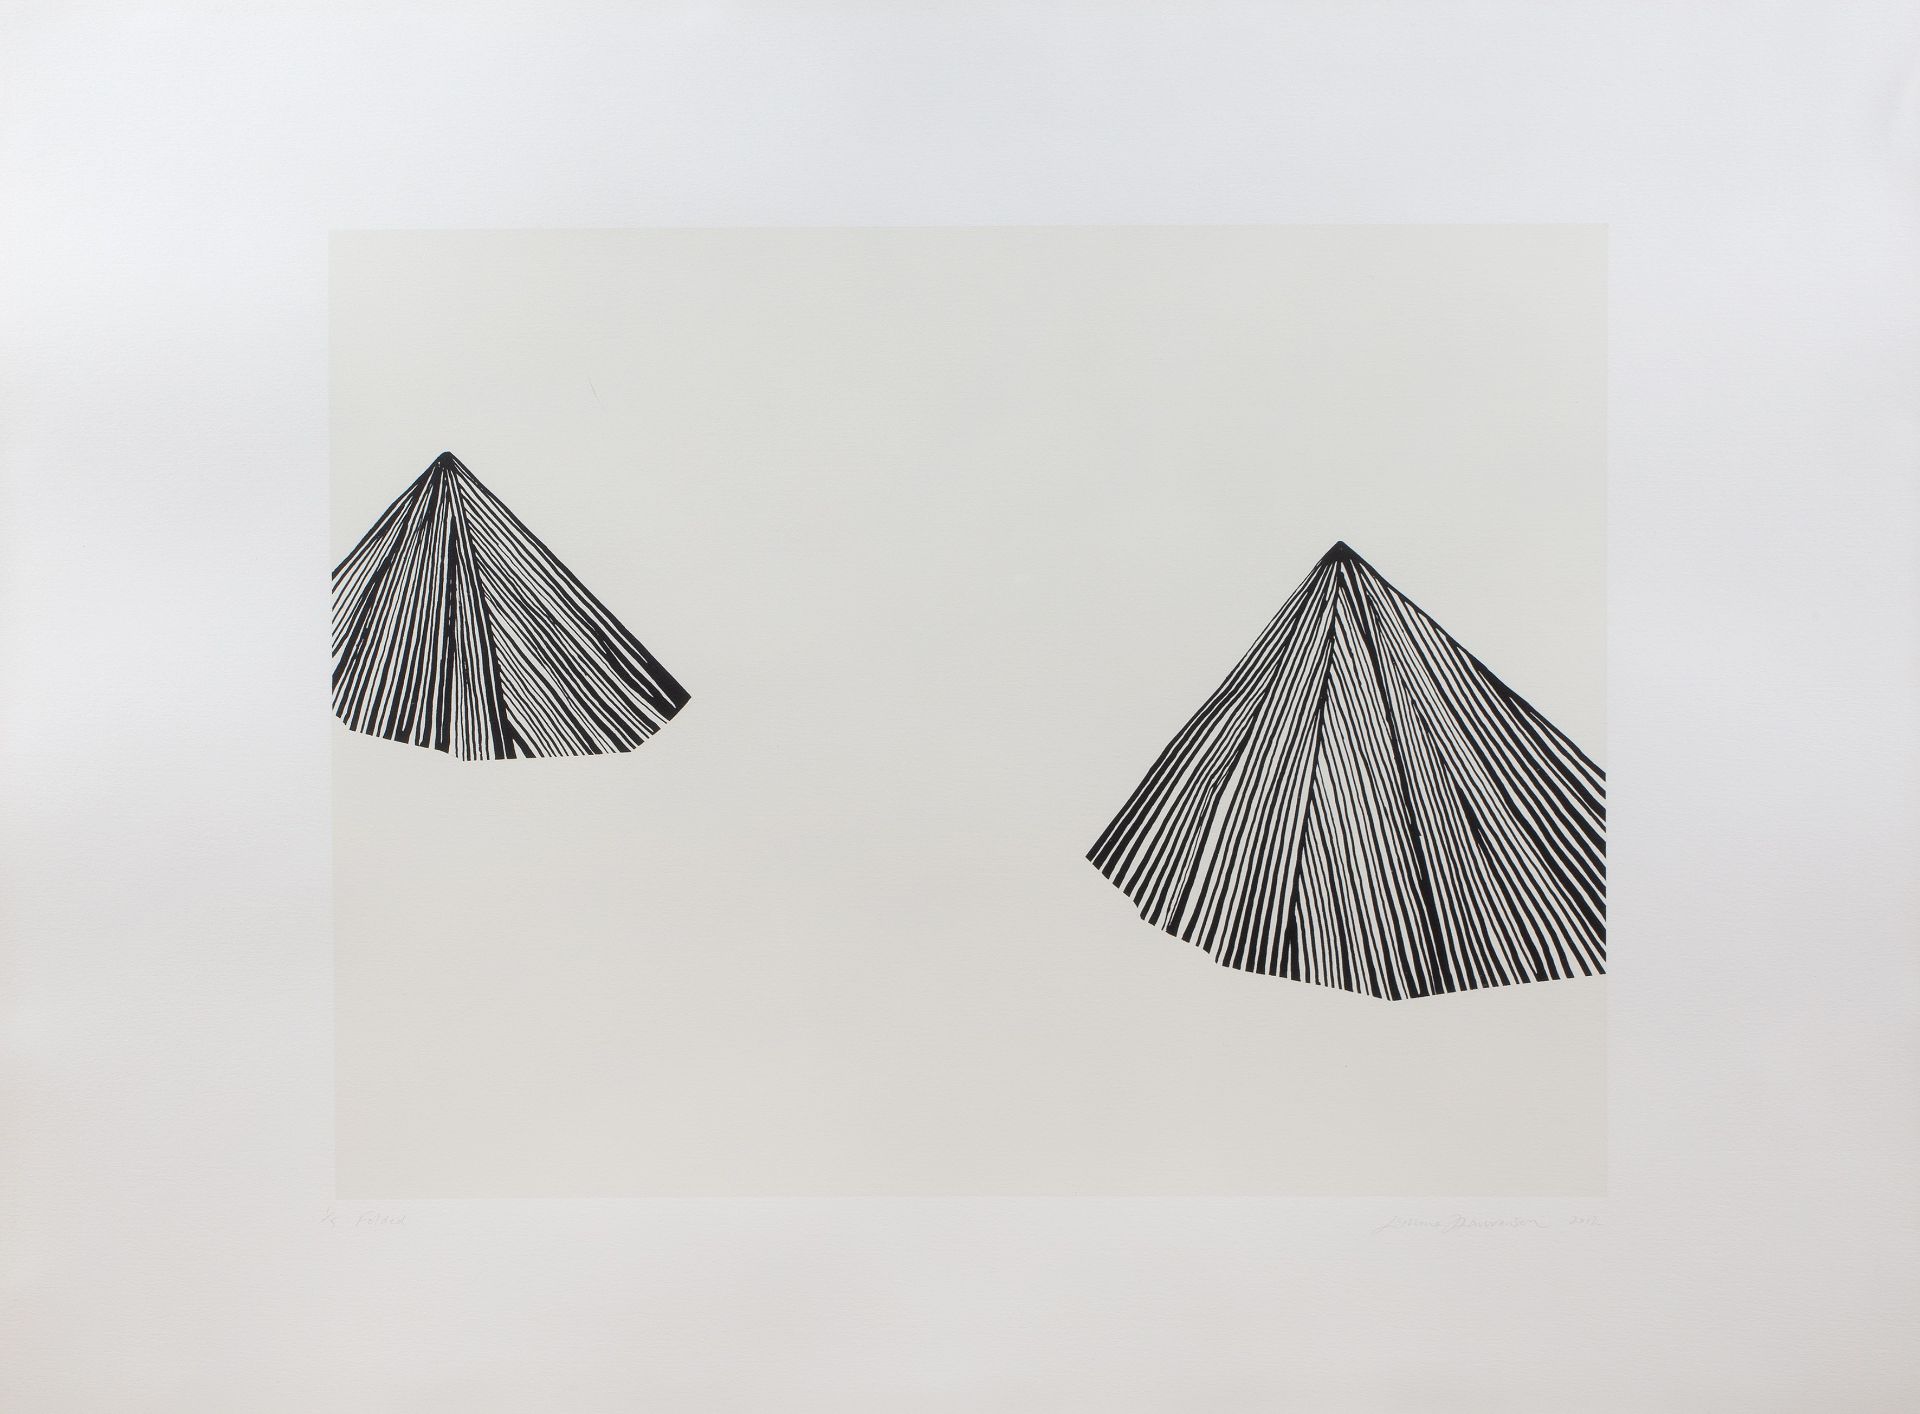 Emma Lawrenson (b.1973) 'Folded', screenprint, edition of 5, signed and dated 2012 to the lower